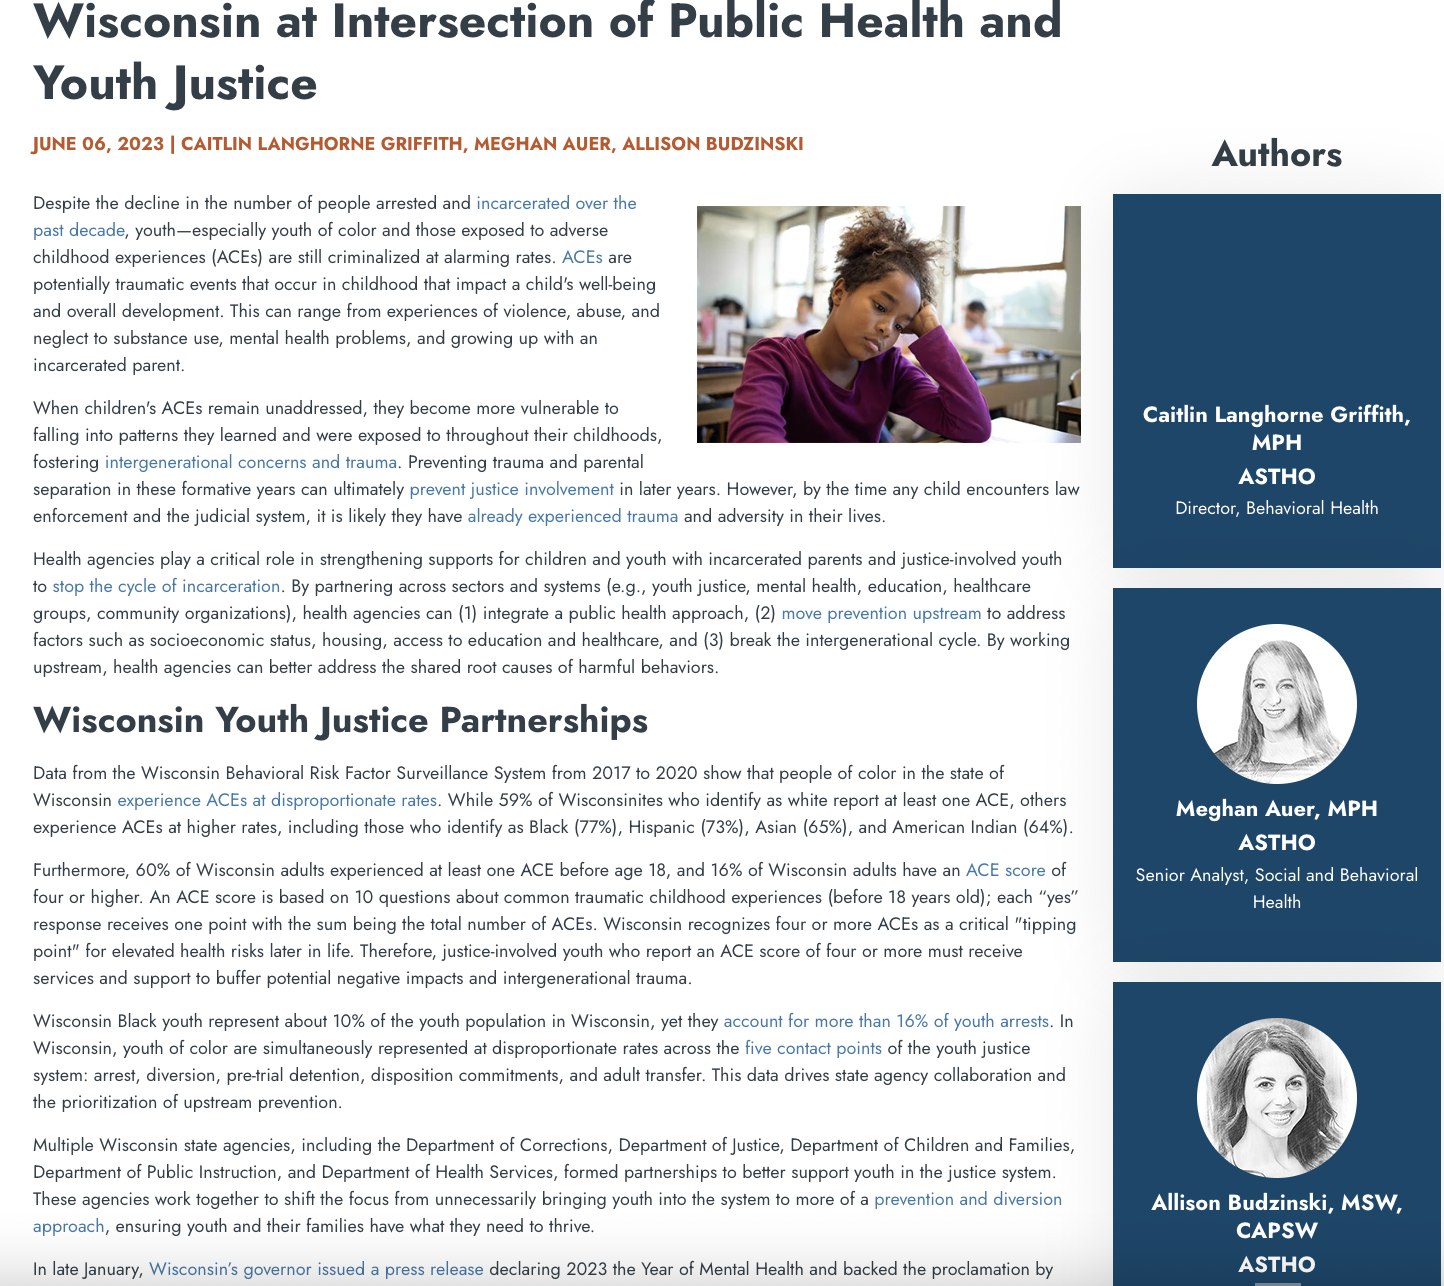 Wisconsin at the Intersection of Public Health and Youth Justice